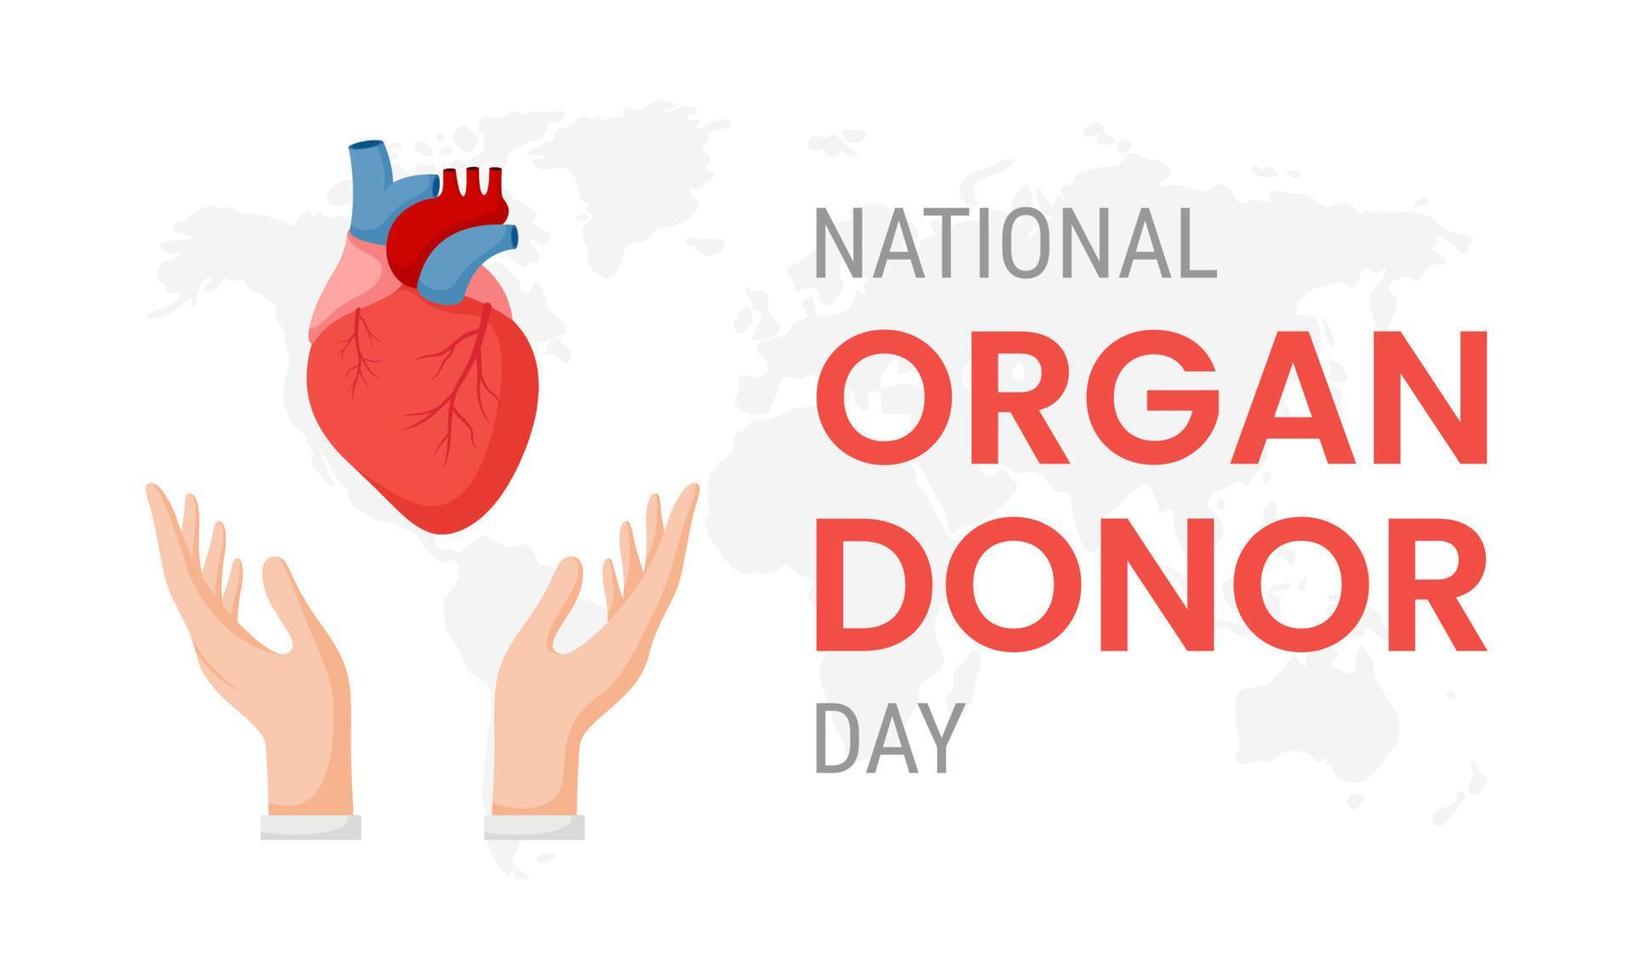 National organ donor day with Human Heart vector